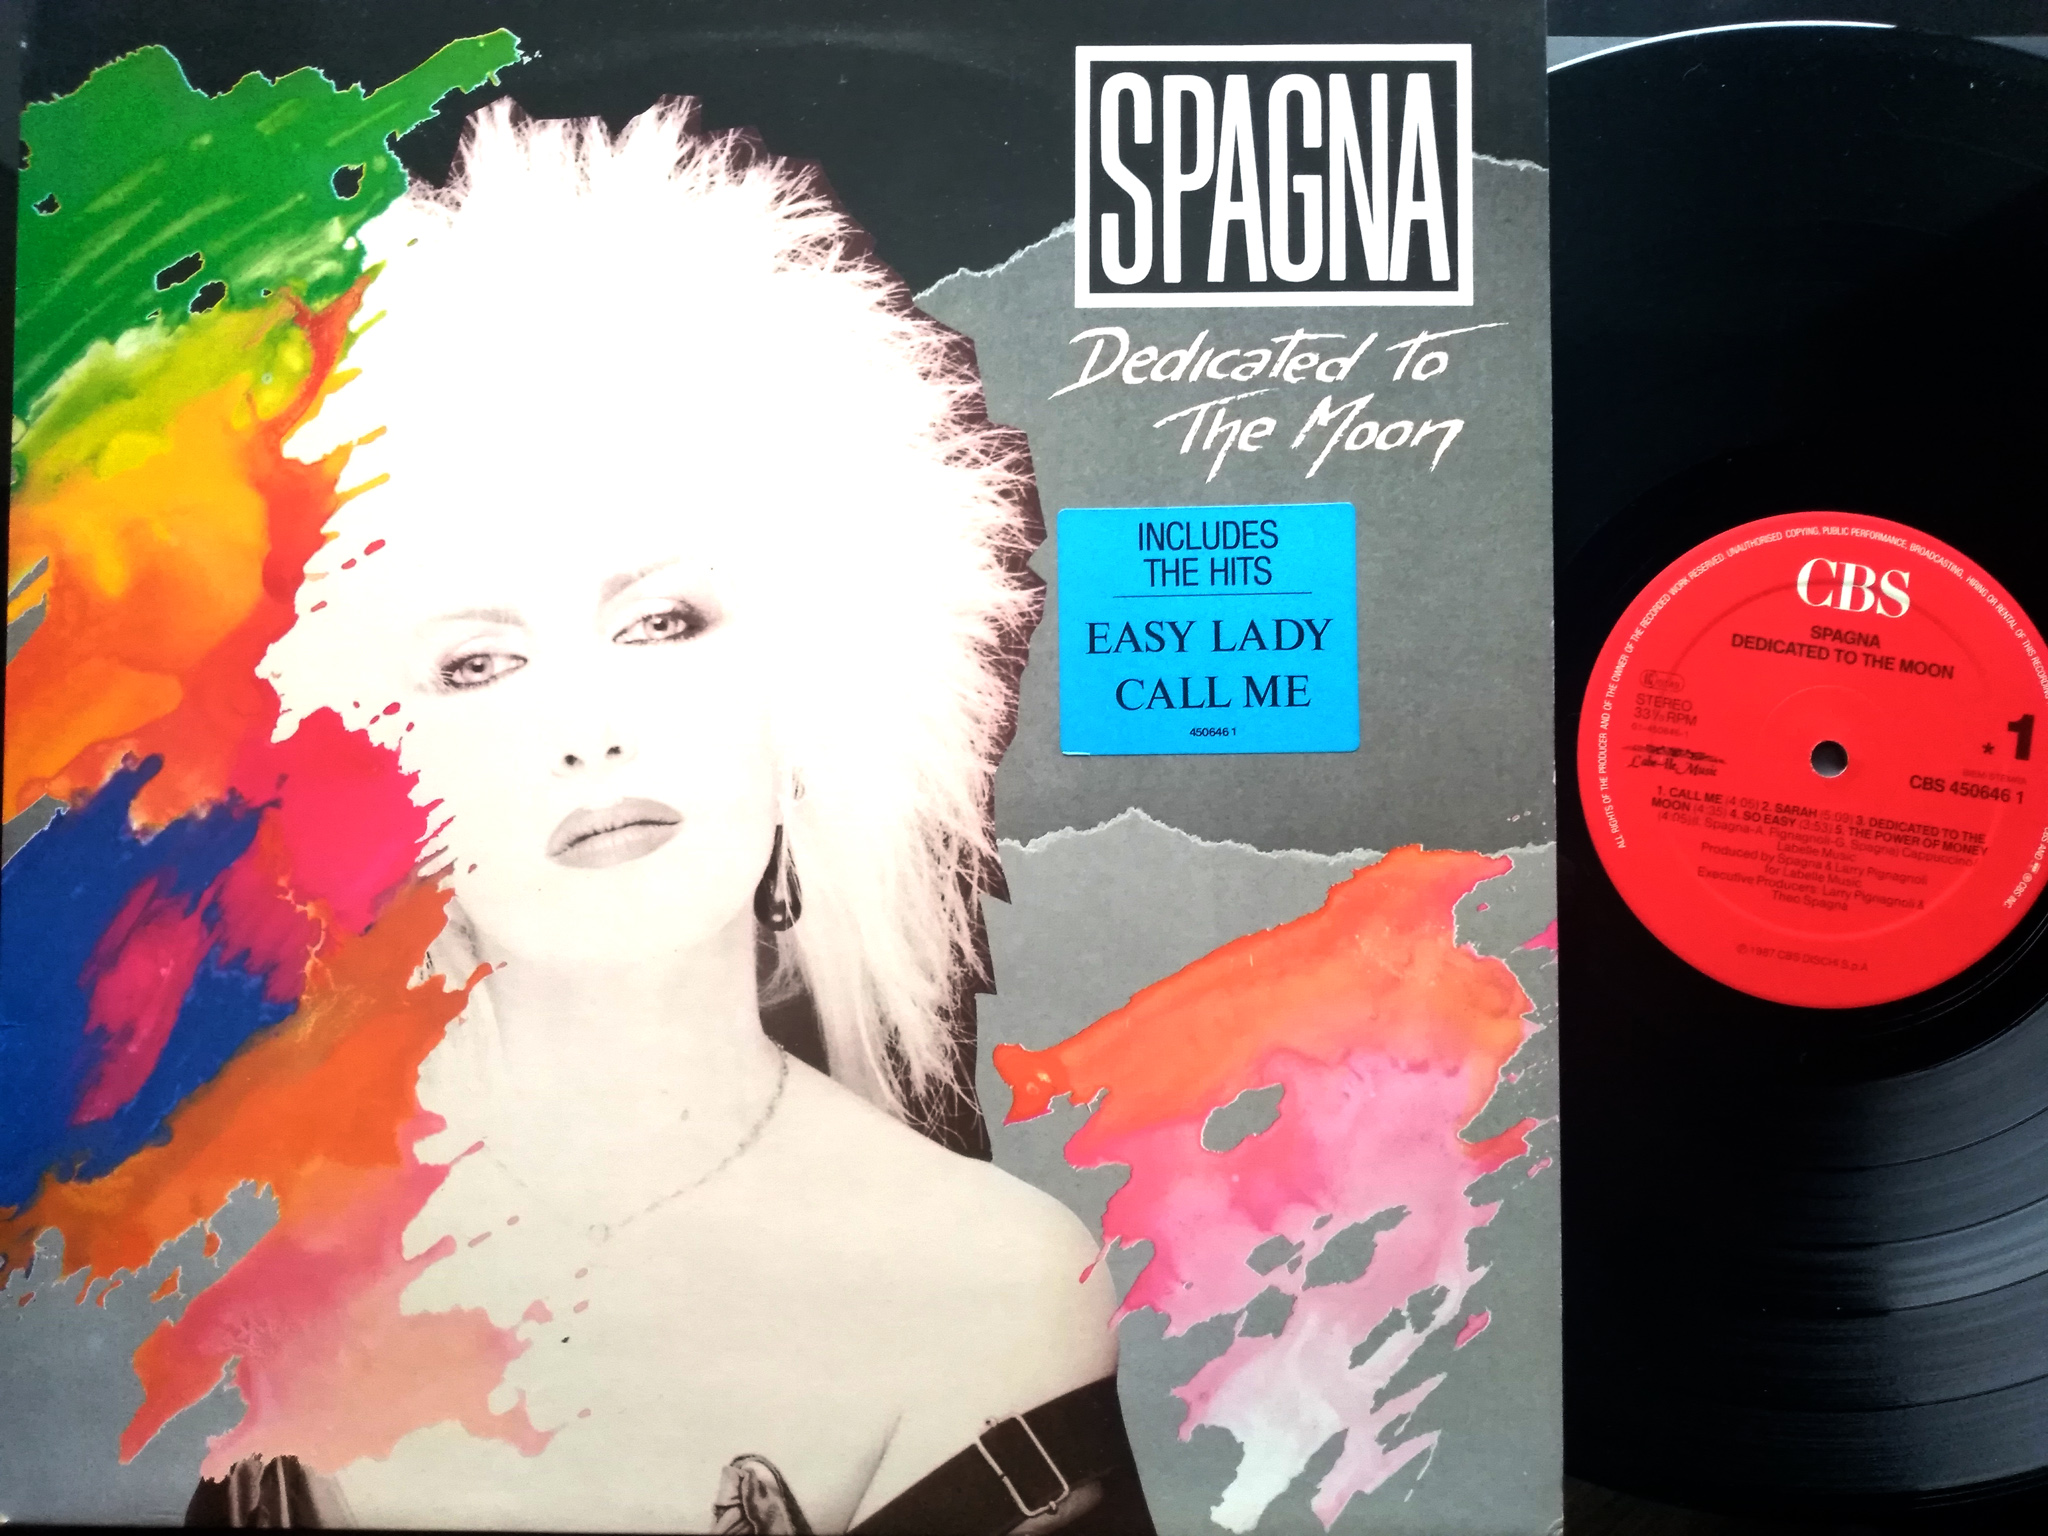 Spagna - Dedicated To The Moon LP